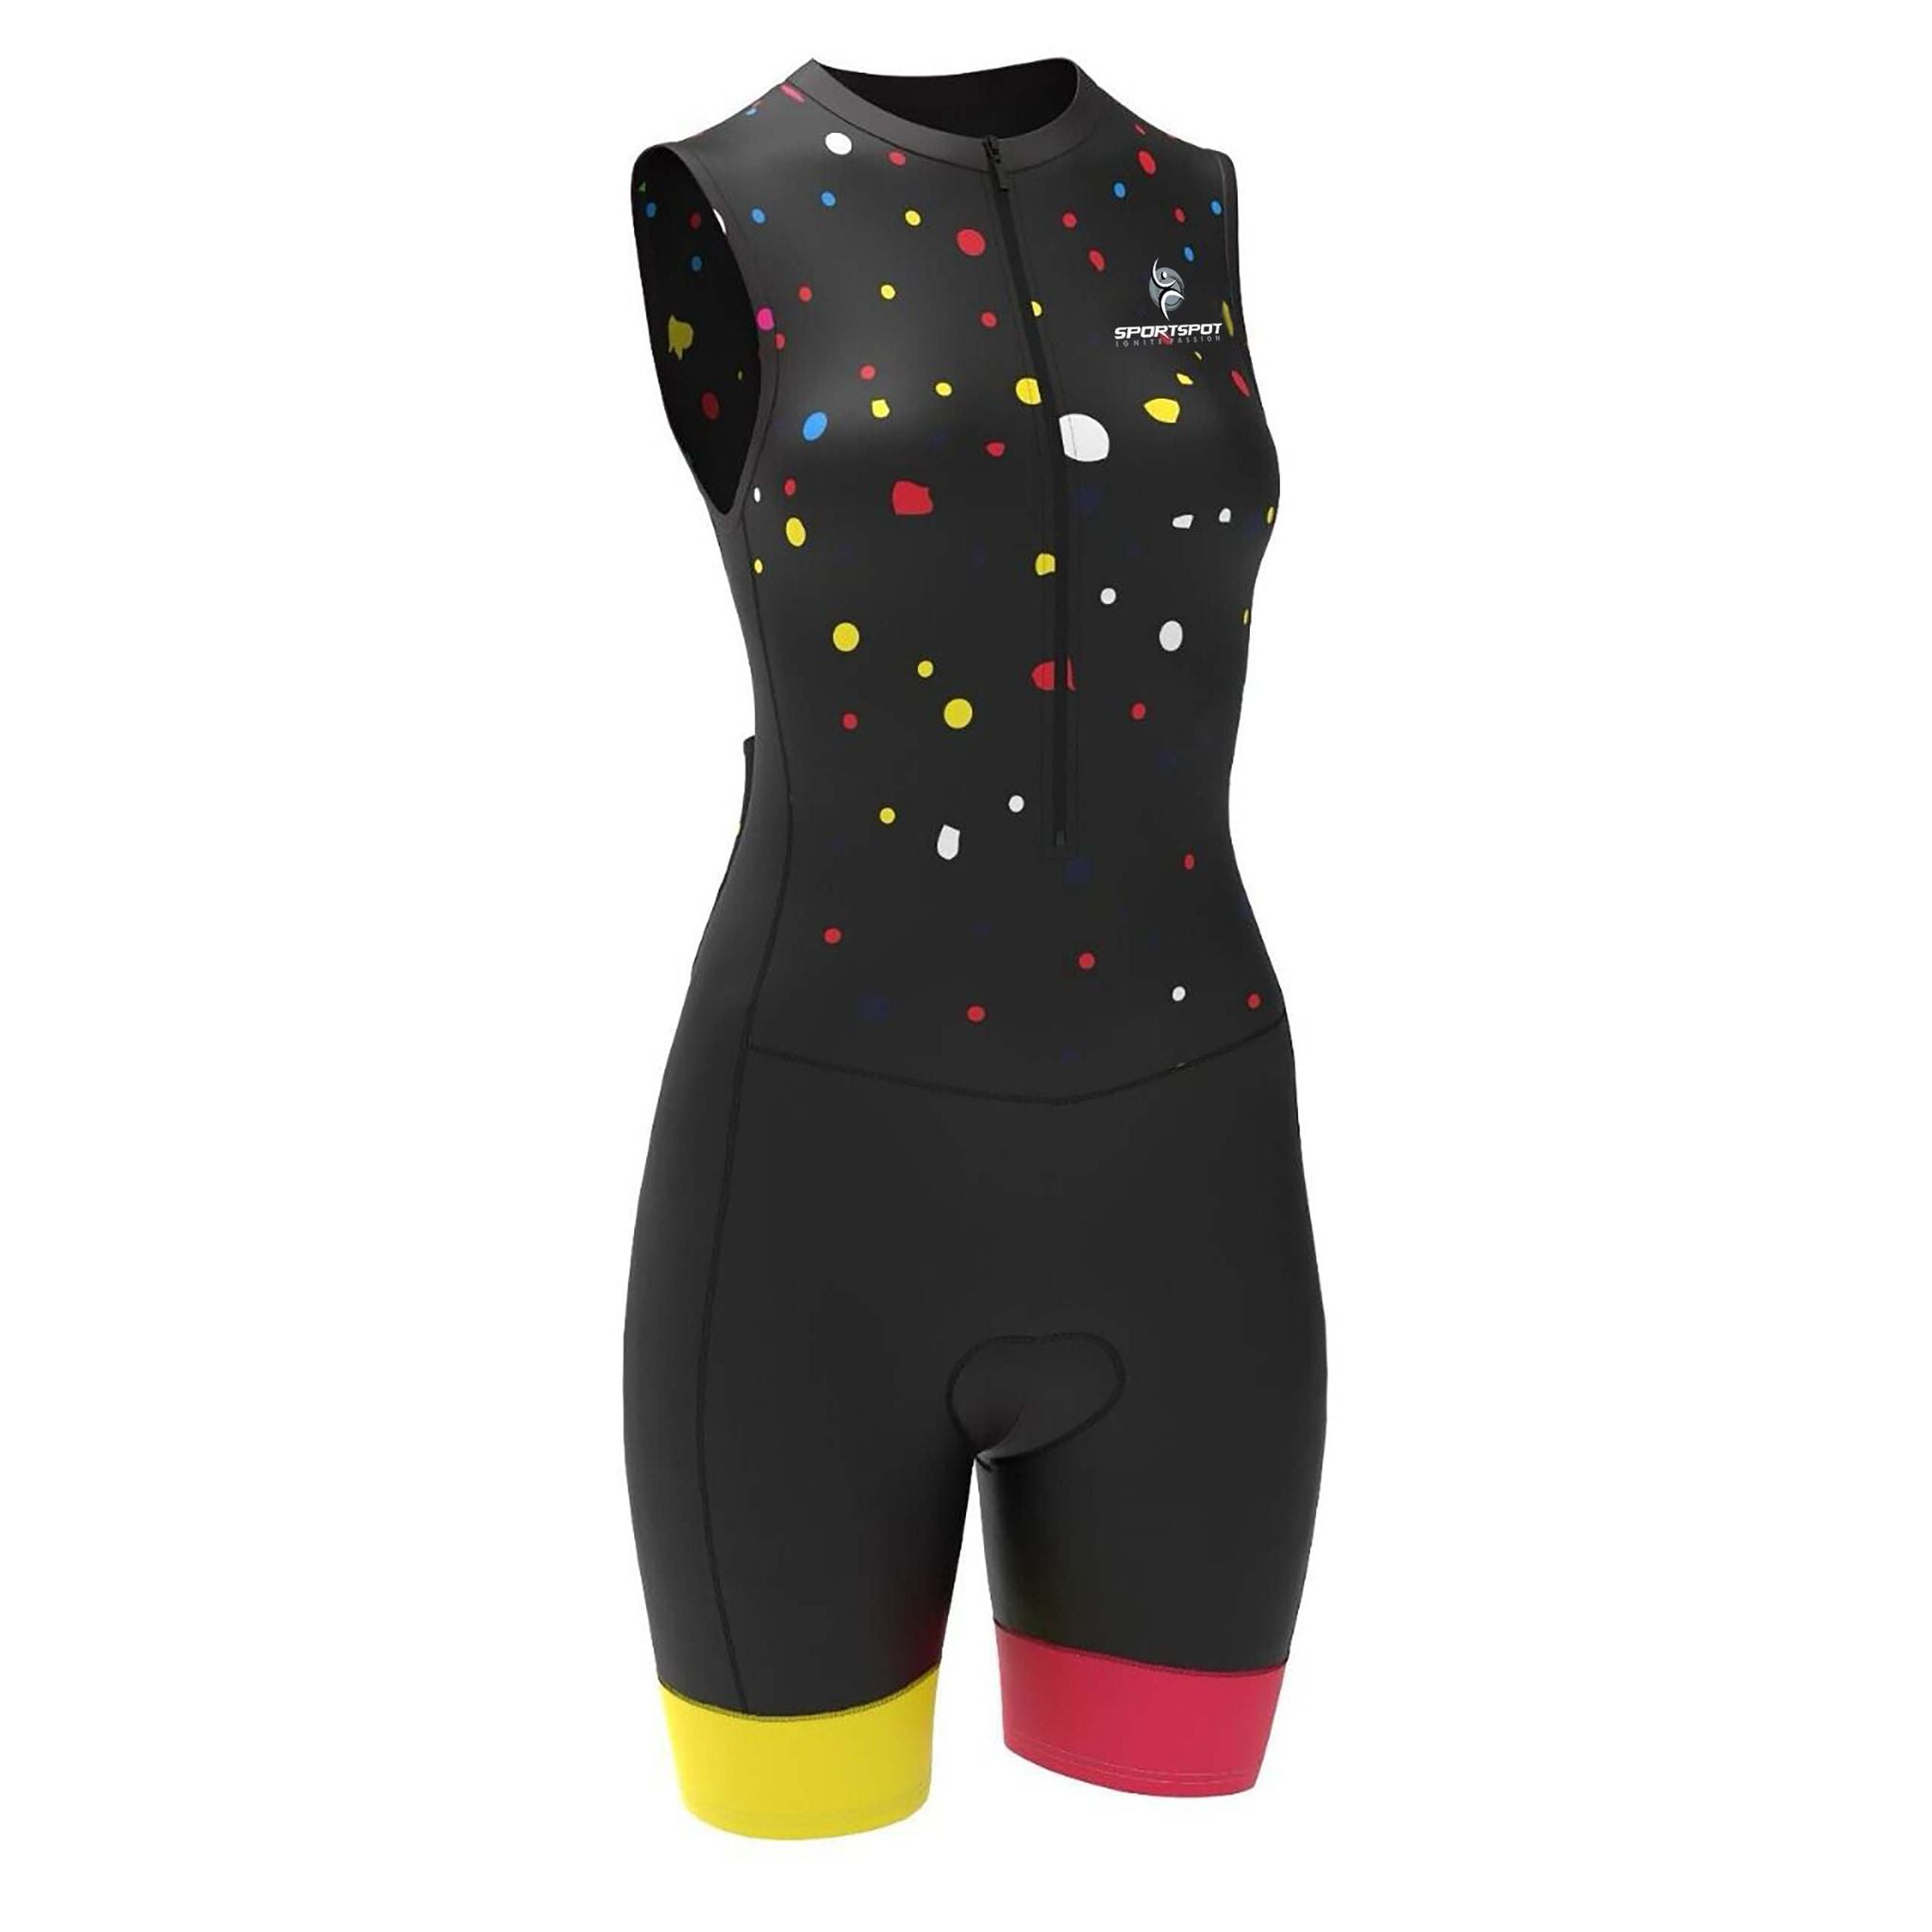 Women's Sleeveless Triathlon Compression Skinsuit for Cycling, Running, and Swimming with Gel Padding